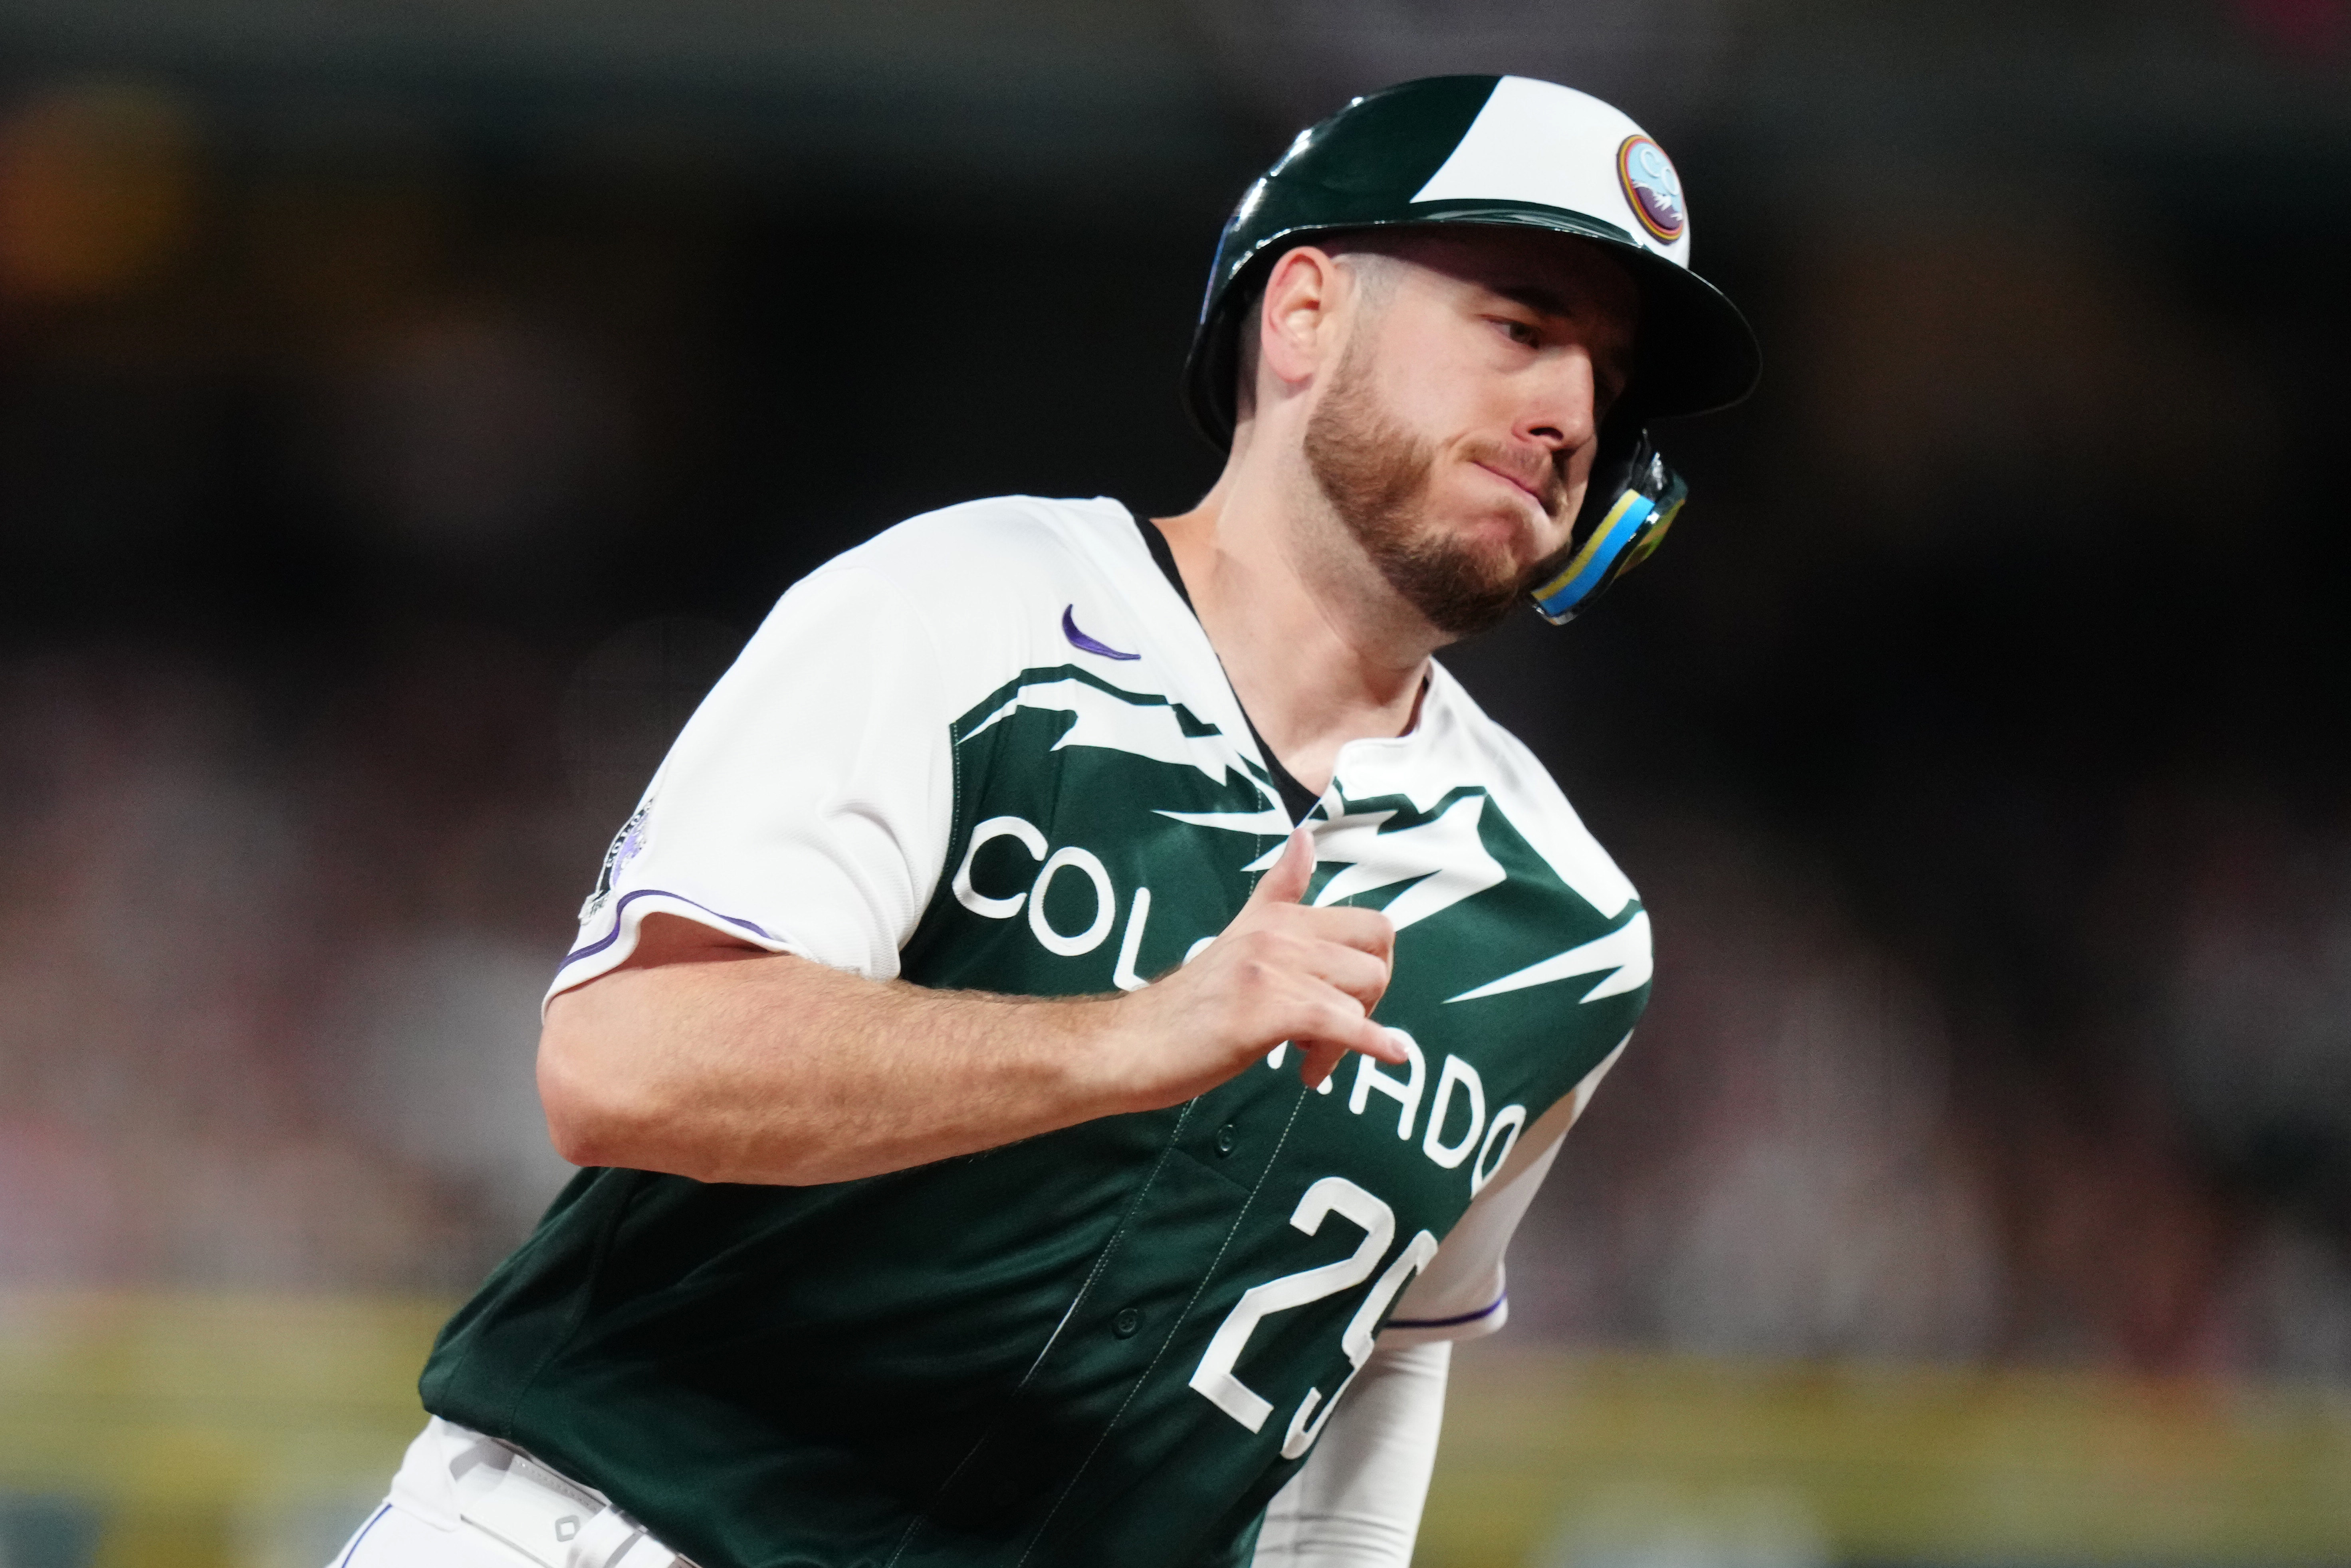 Rockies lose to Tigers in 10 innings on Zach McKinstry's three-run